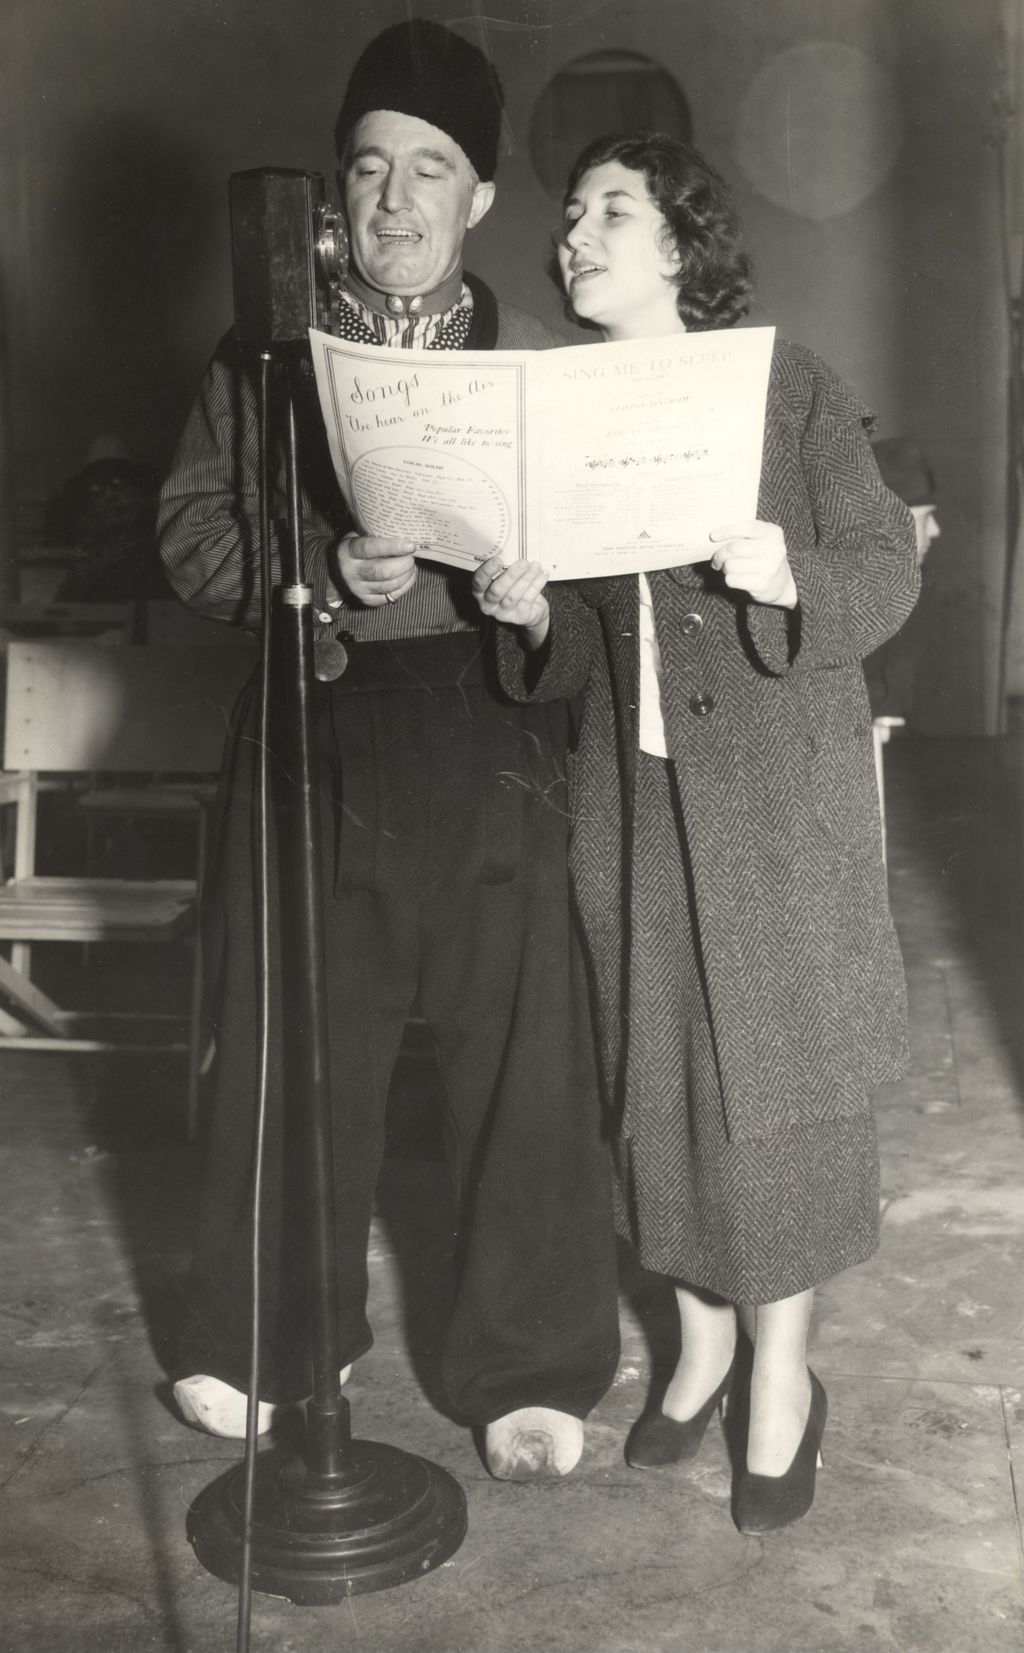 Victor Clement and Miss Daisy Fisher, two of the entrants in the Grand Opera Contest